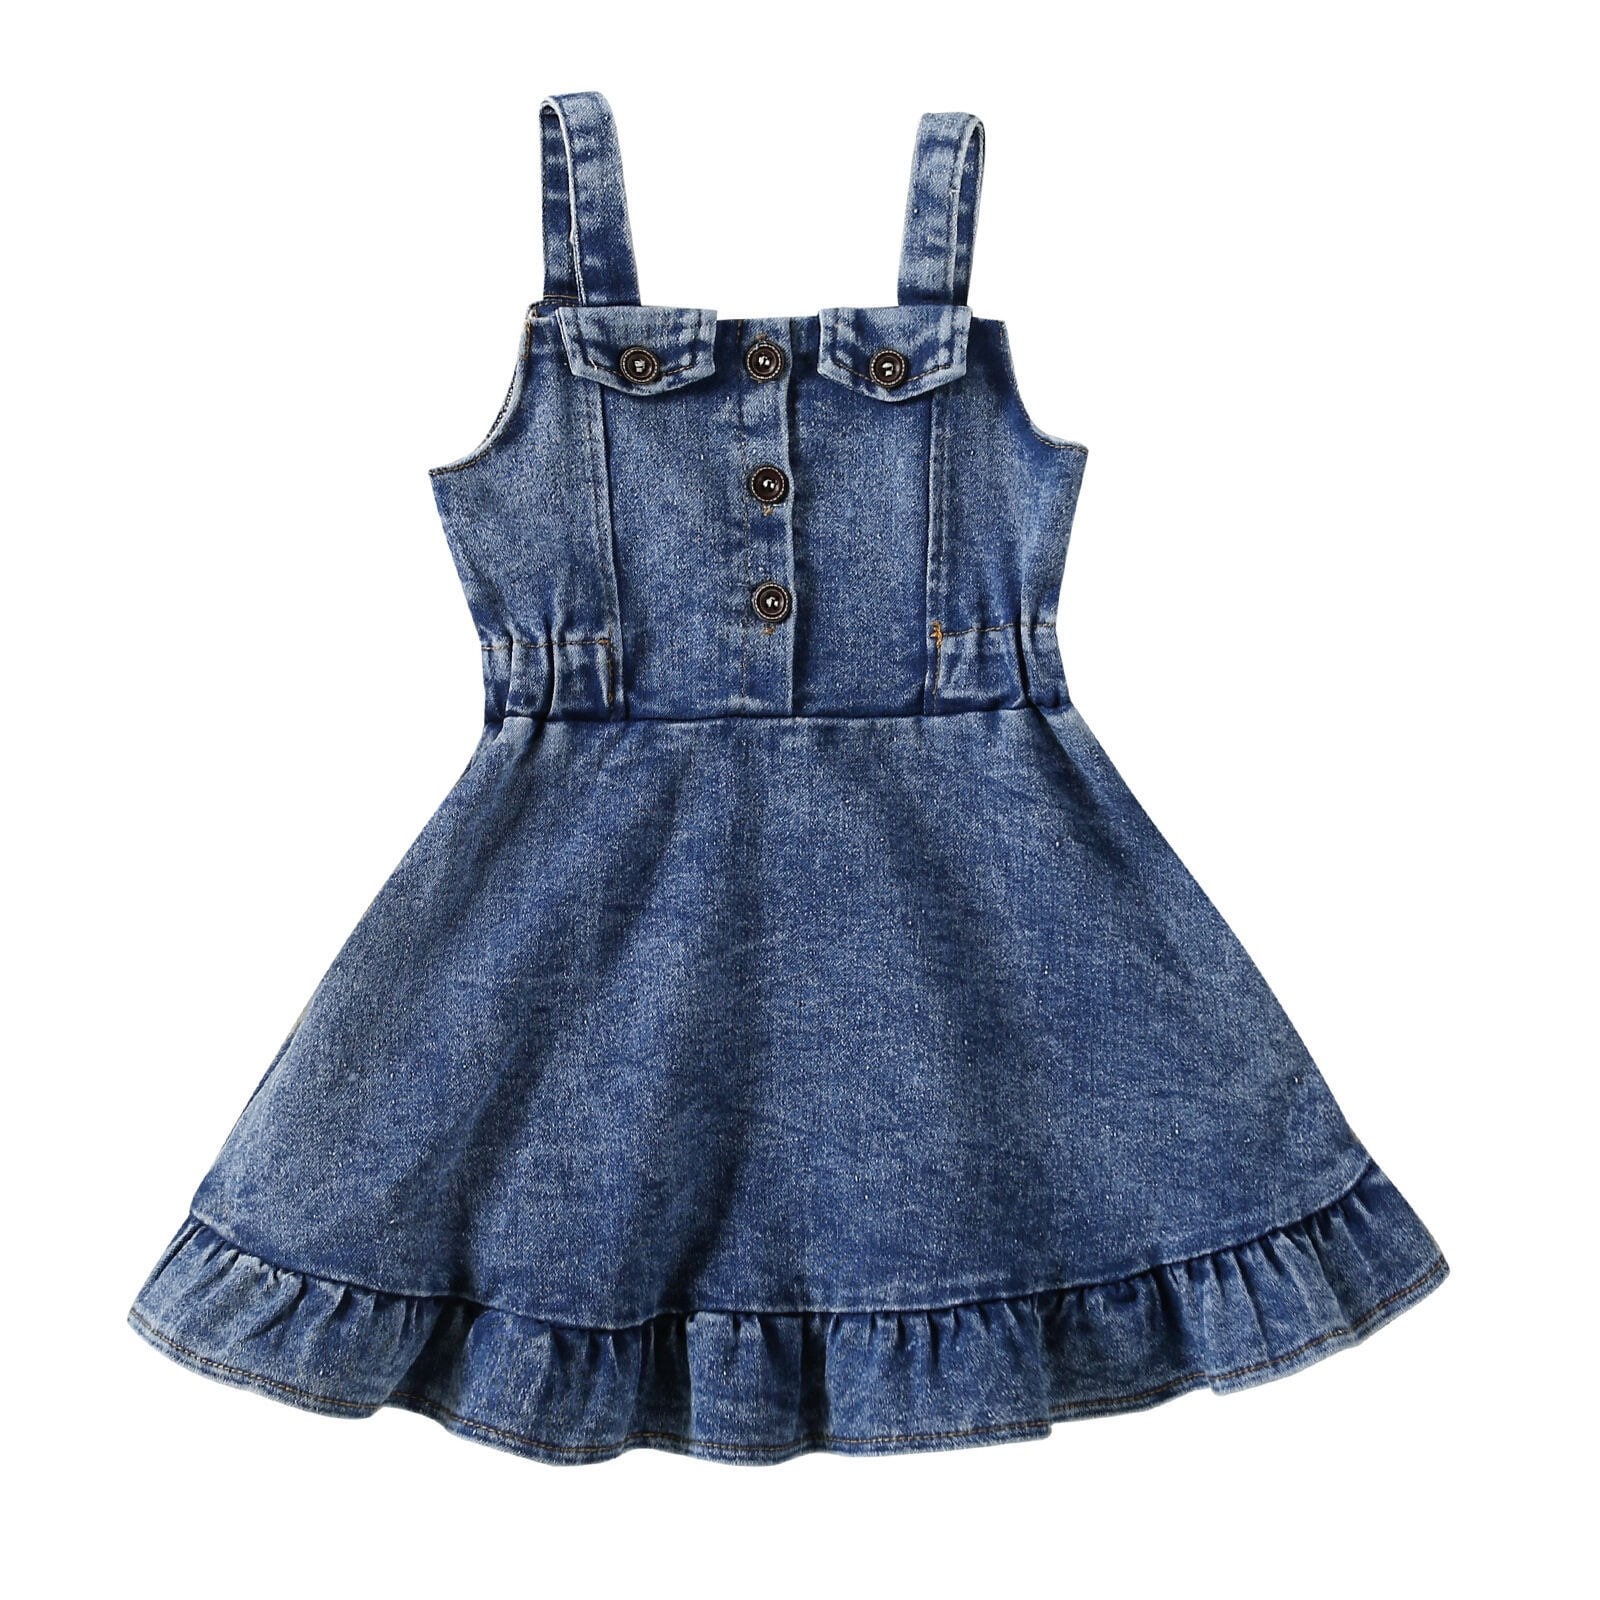 Denim Dress for a baby girl — comfortable yet stylish outfit for a toddler,  Babies & Kids, Babies & Kids Fashion on Carousell